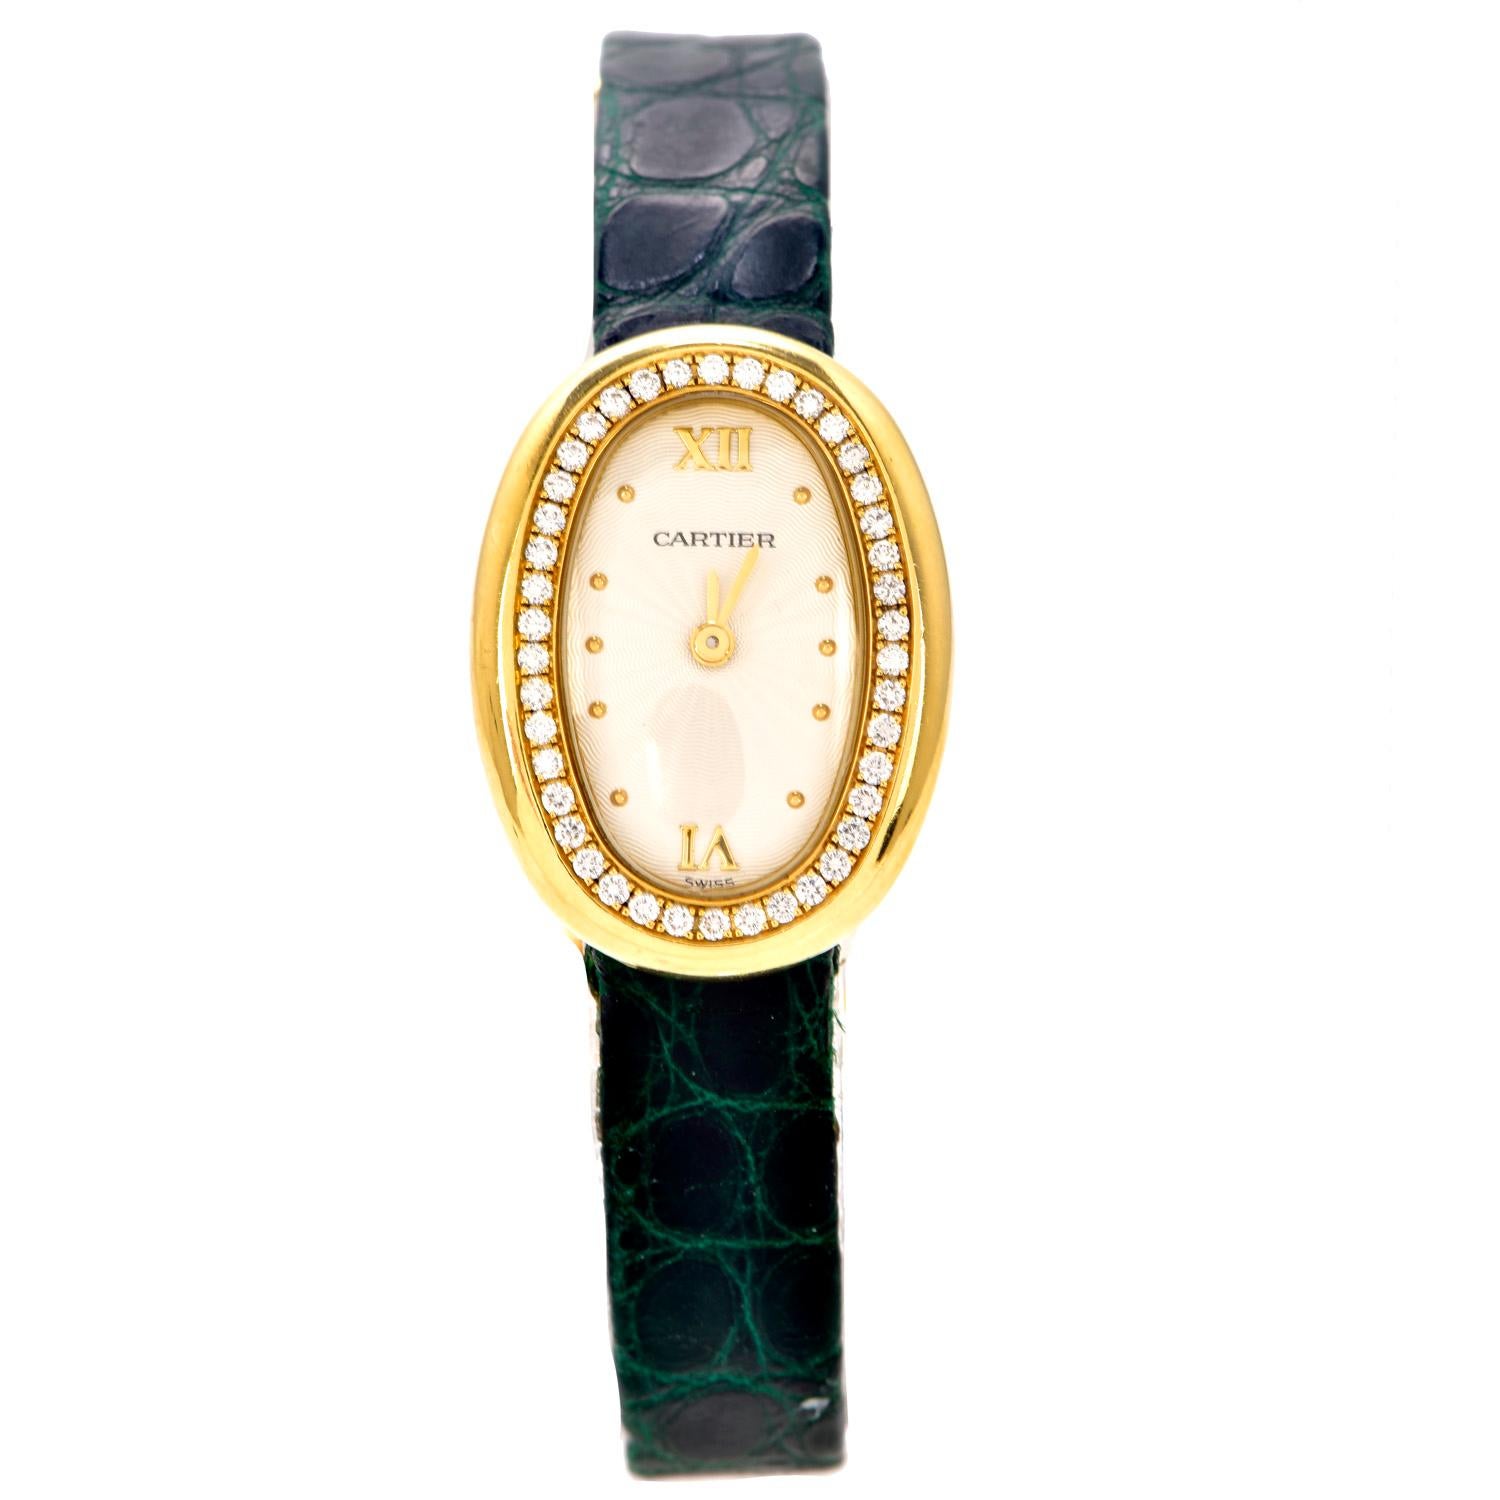 This Cartier 1990s Baignoire Diamond 18K Gold Vintage Ladies Watch is a delicate example of Cartier’s designs timelessness weighing 28.5 grams

Expertly crafted in solid heavy 18k yellow gold, composed of  (42) Genuine Dazzling Diamonds round-cut,